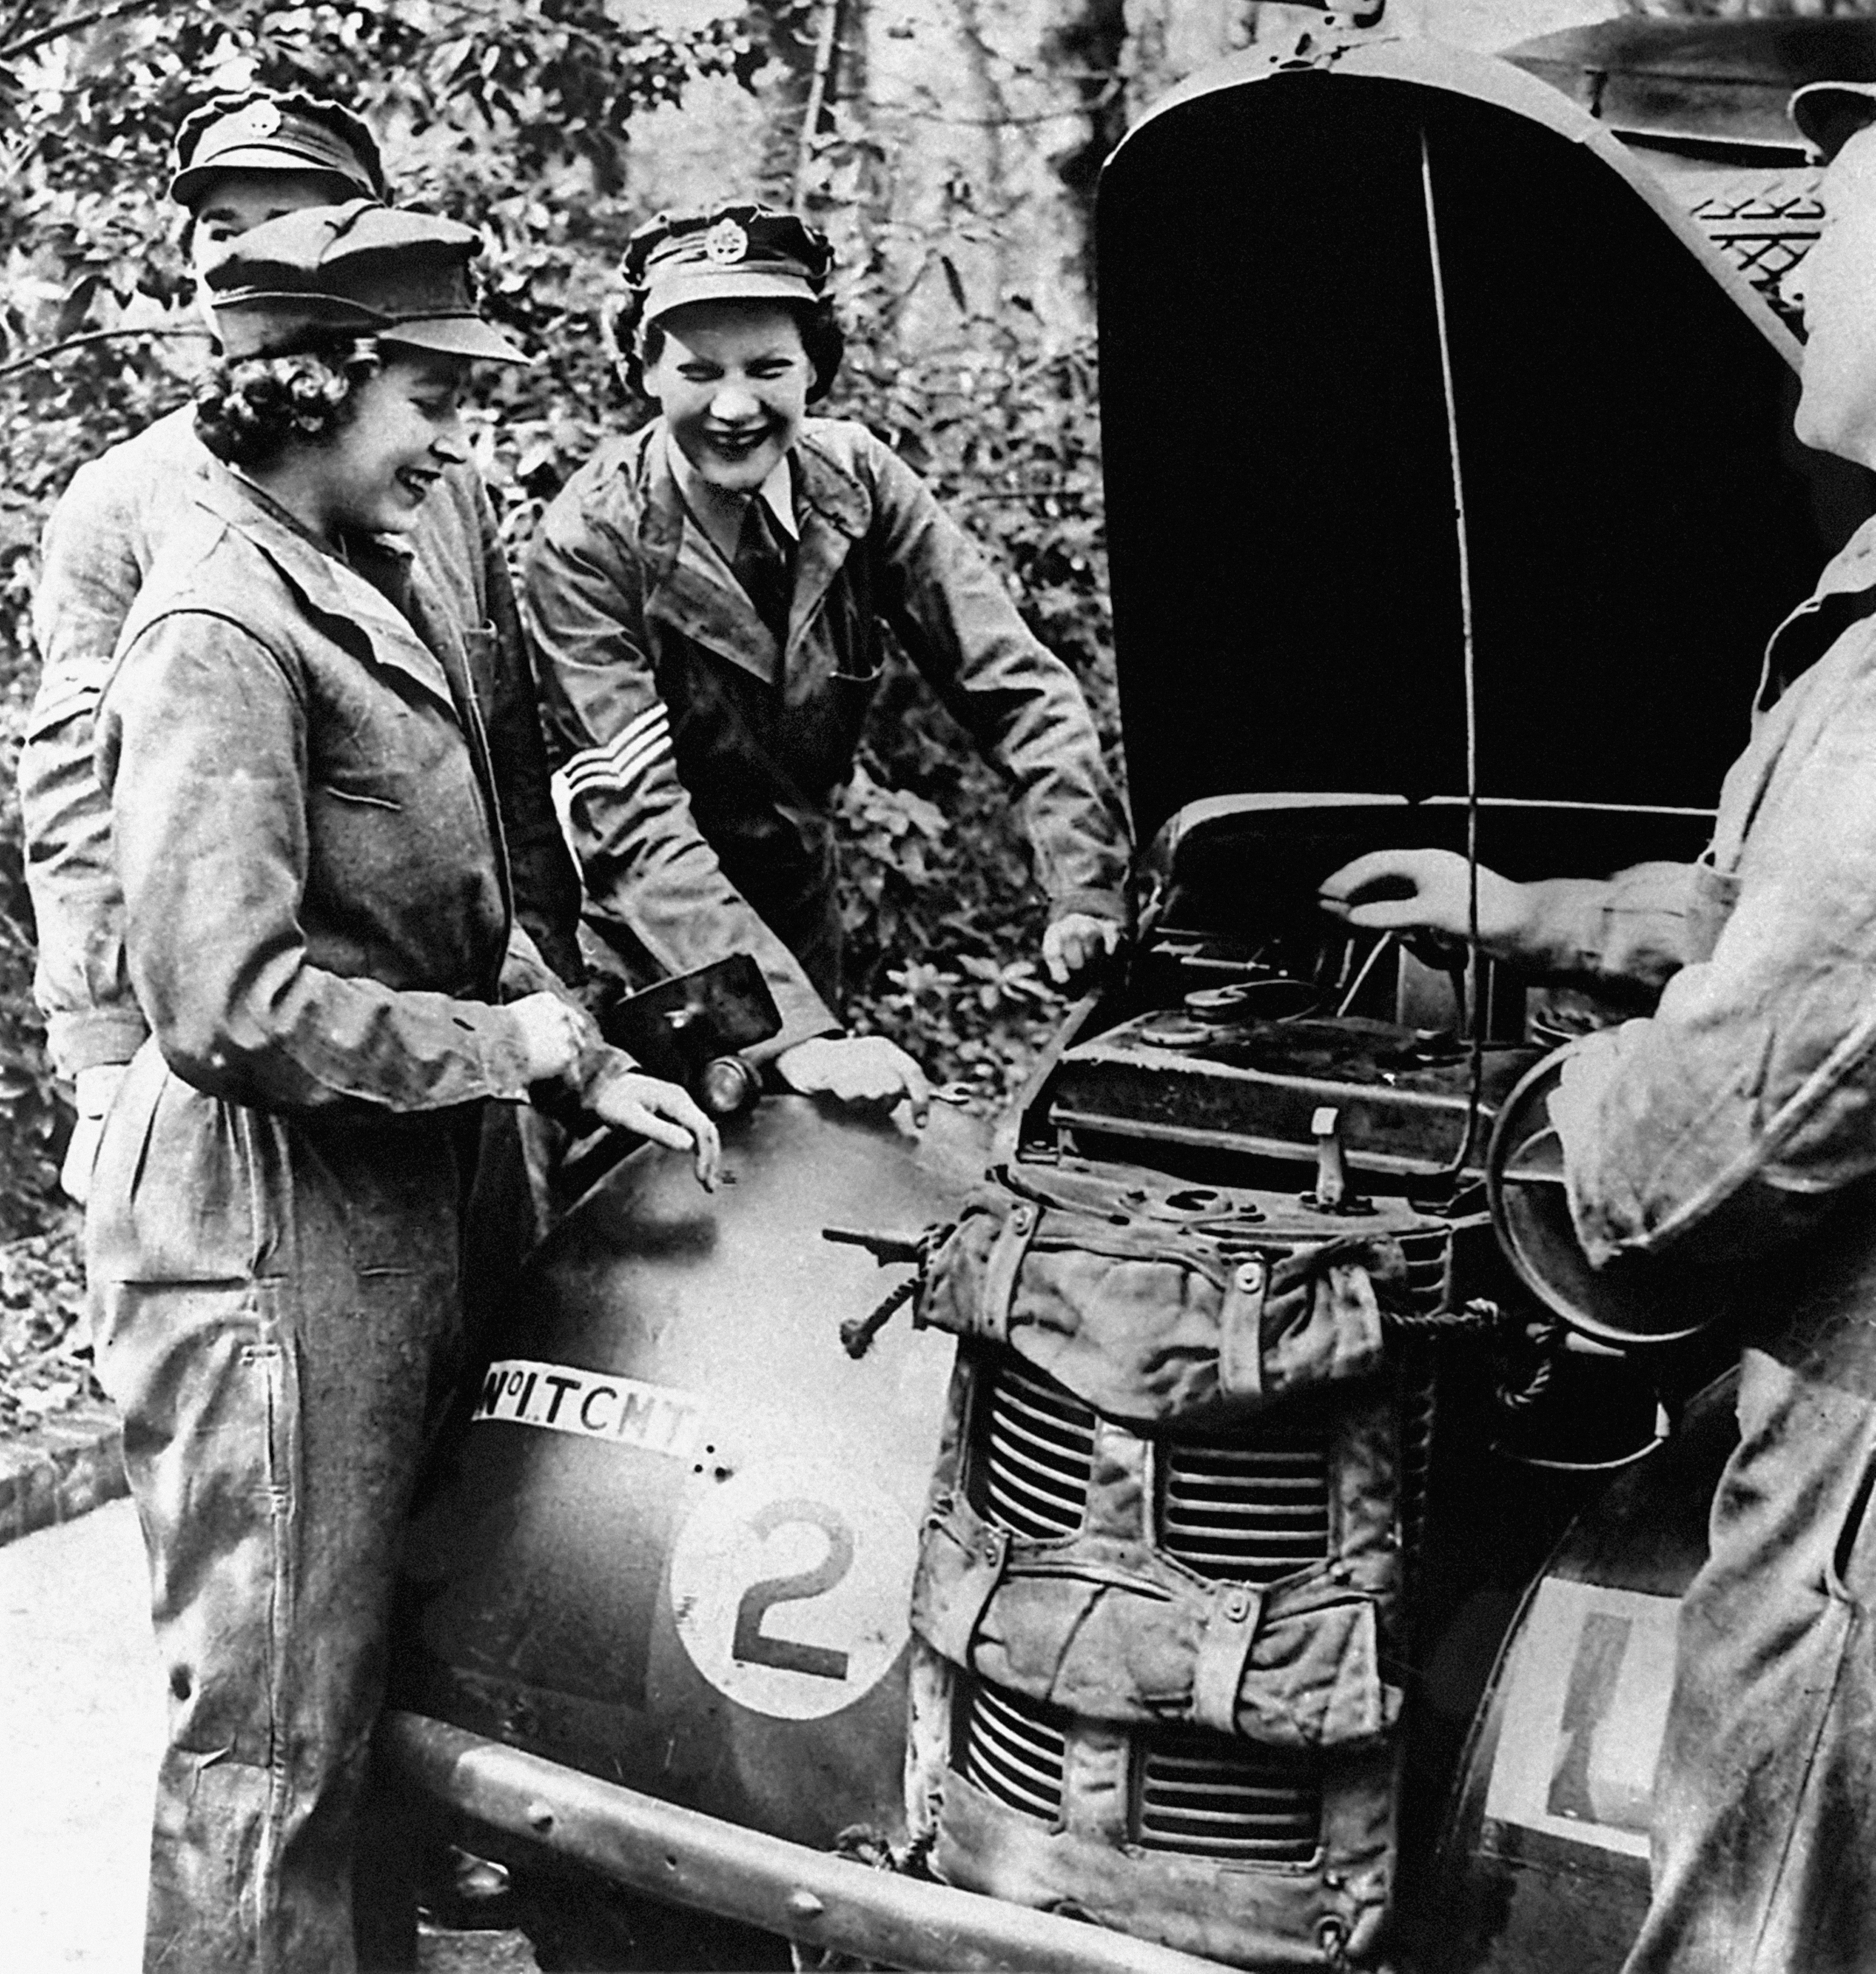 Princess Elizabeth receives vehicle maintenance instruction on an Austin 10 Light Utility Vehicle while serving with No 1 MTTC at Camberley, Surrey.